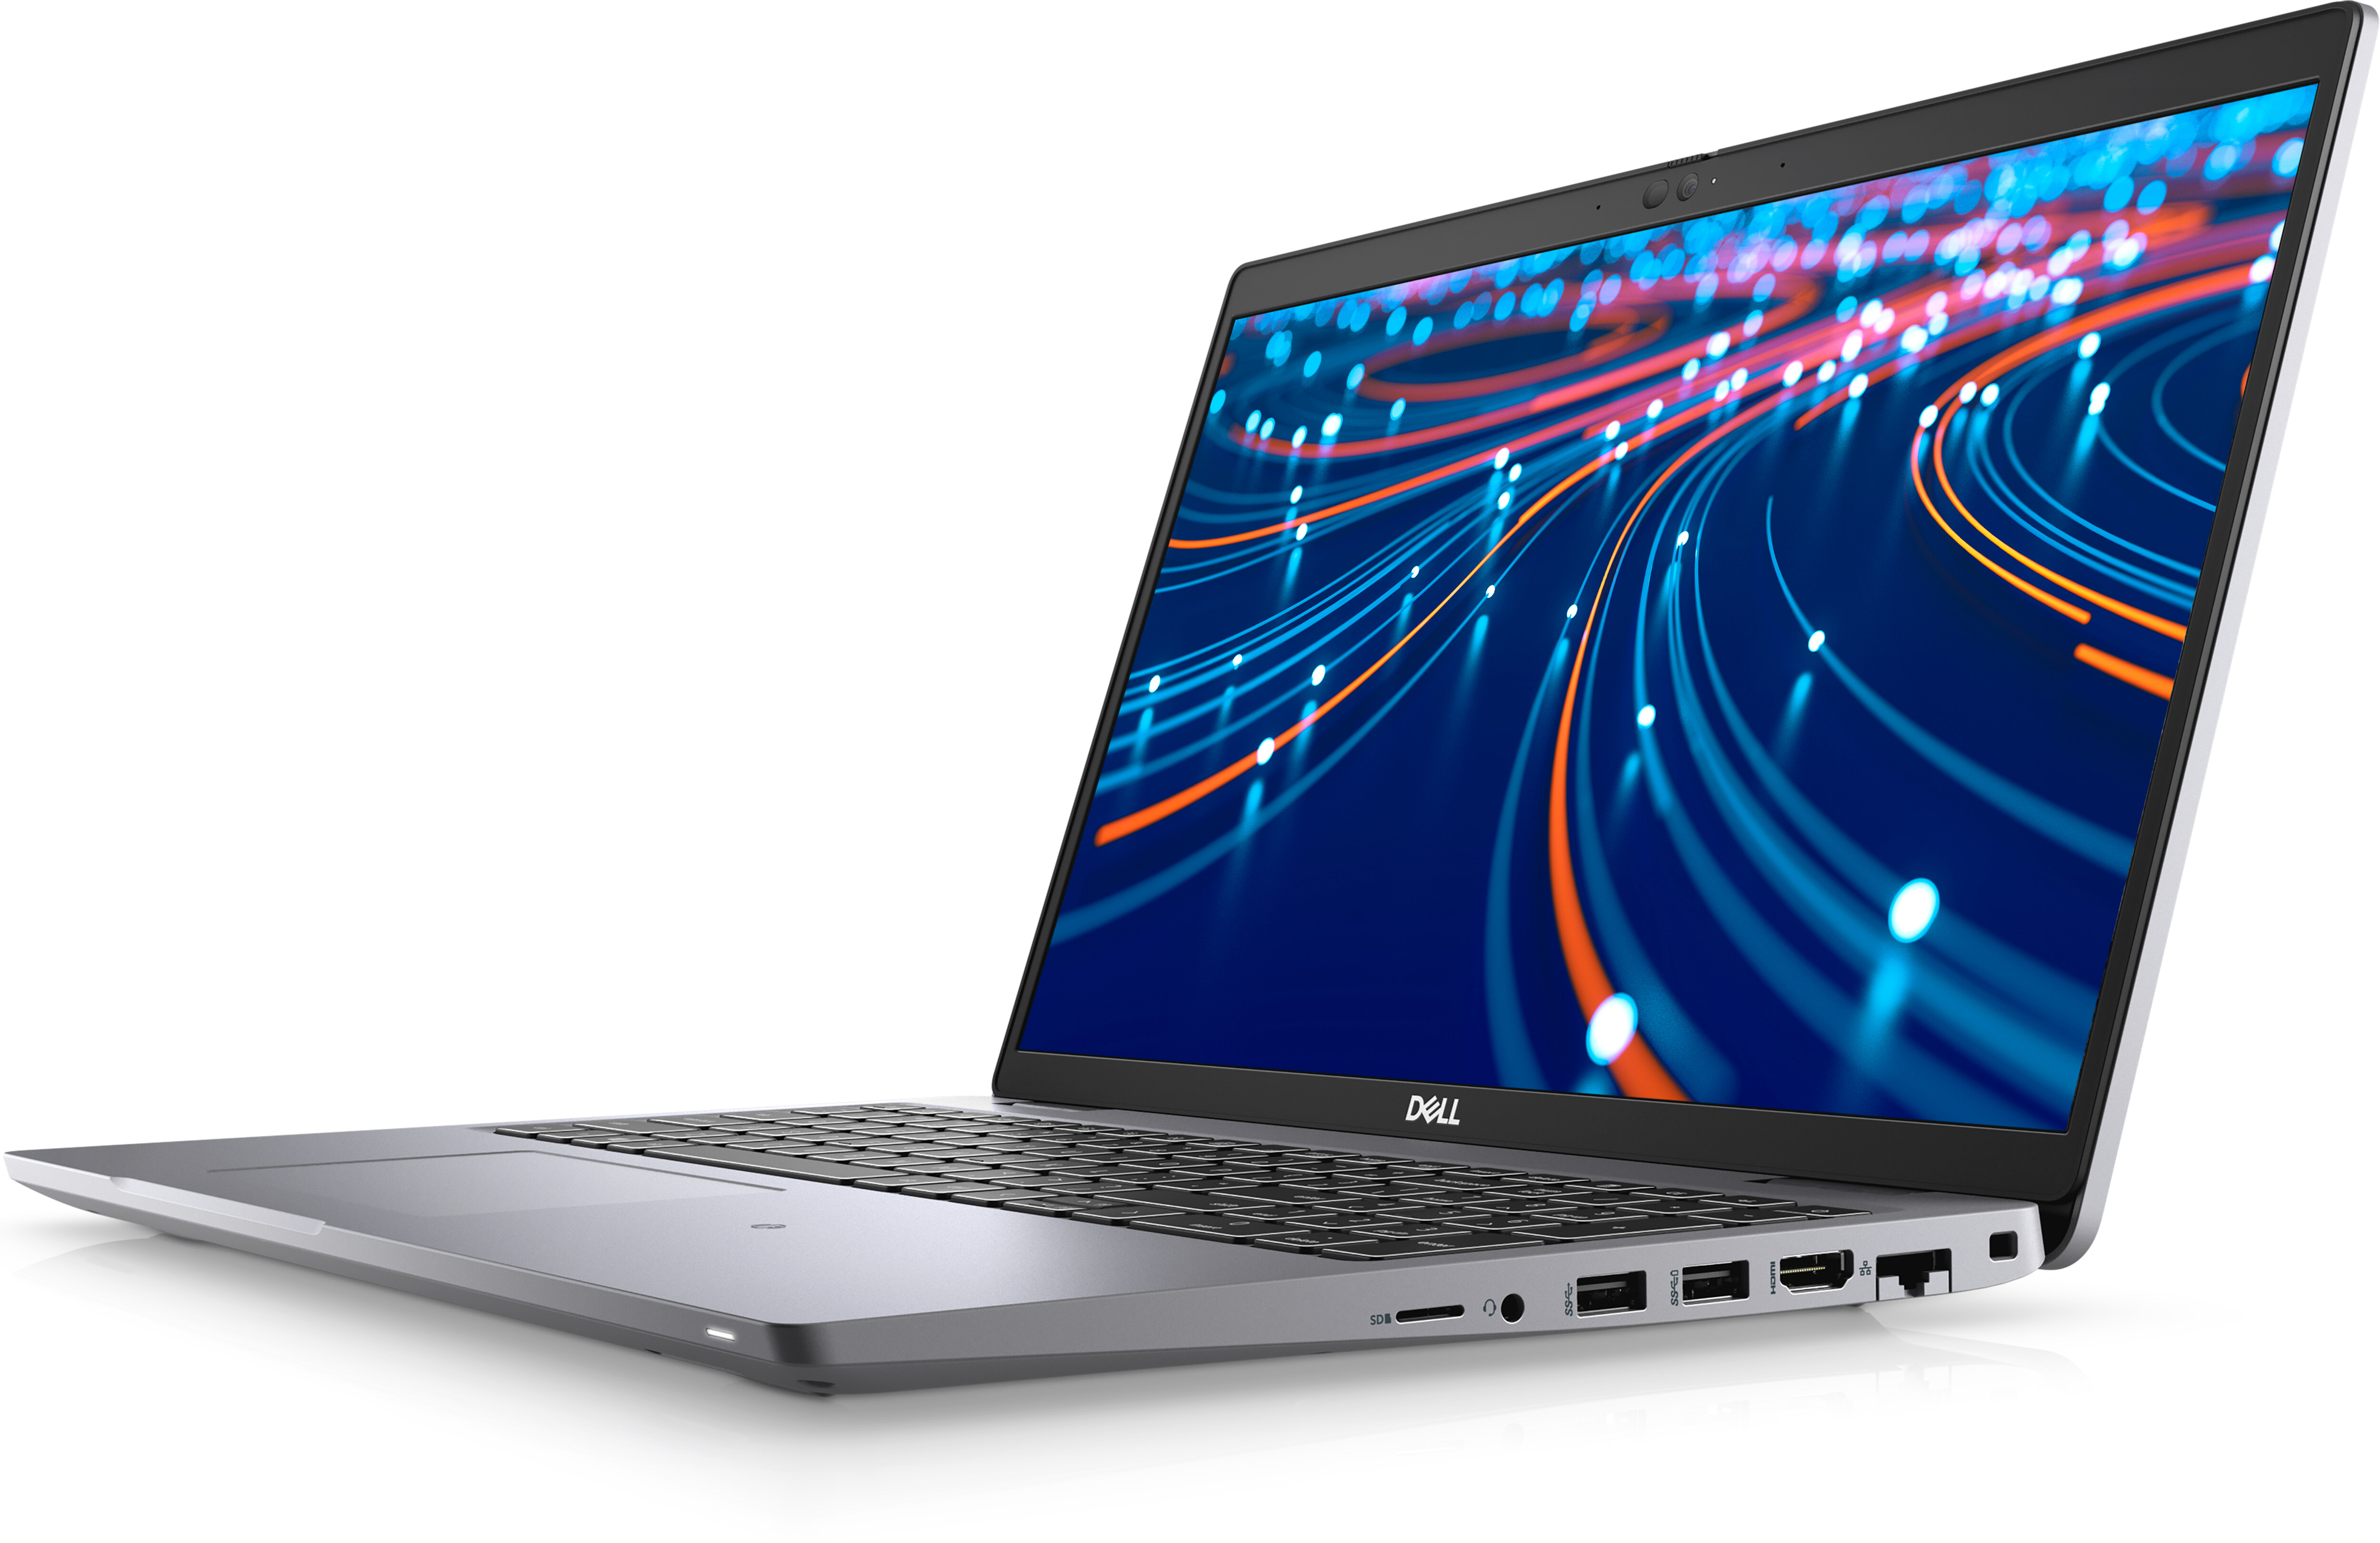 Latitude 15-Inch 5520 Business Laptop with Long Battery Life 